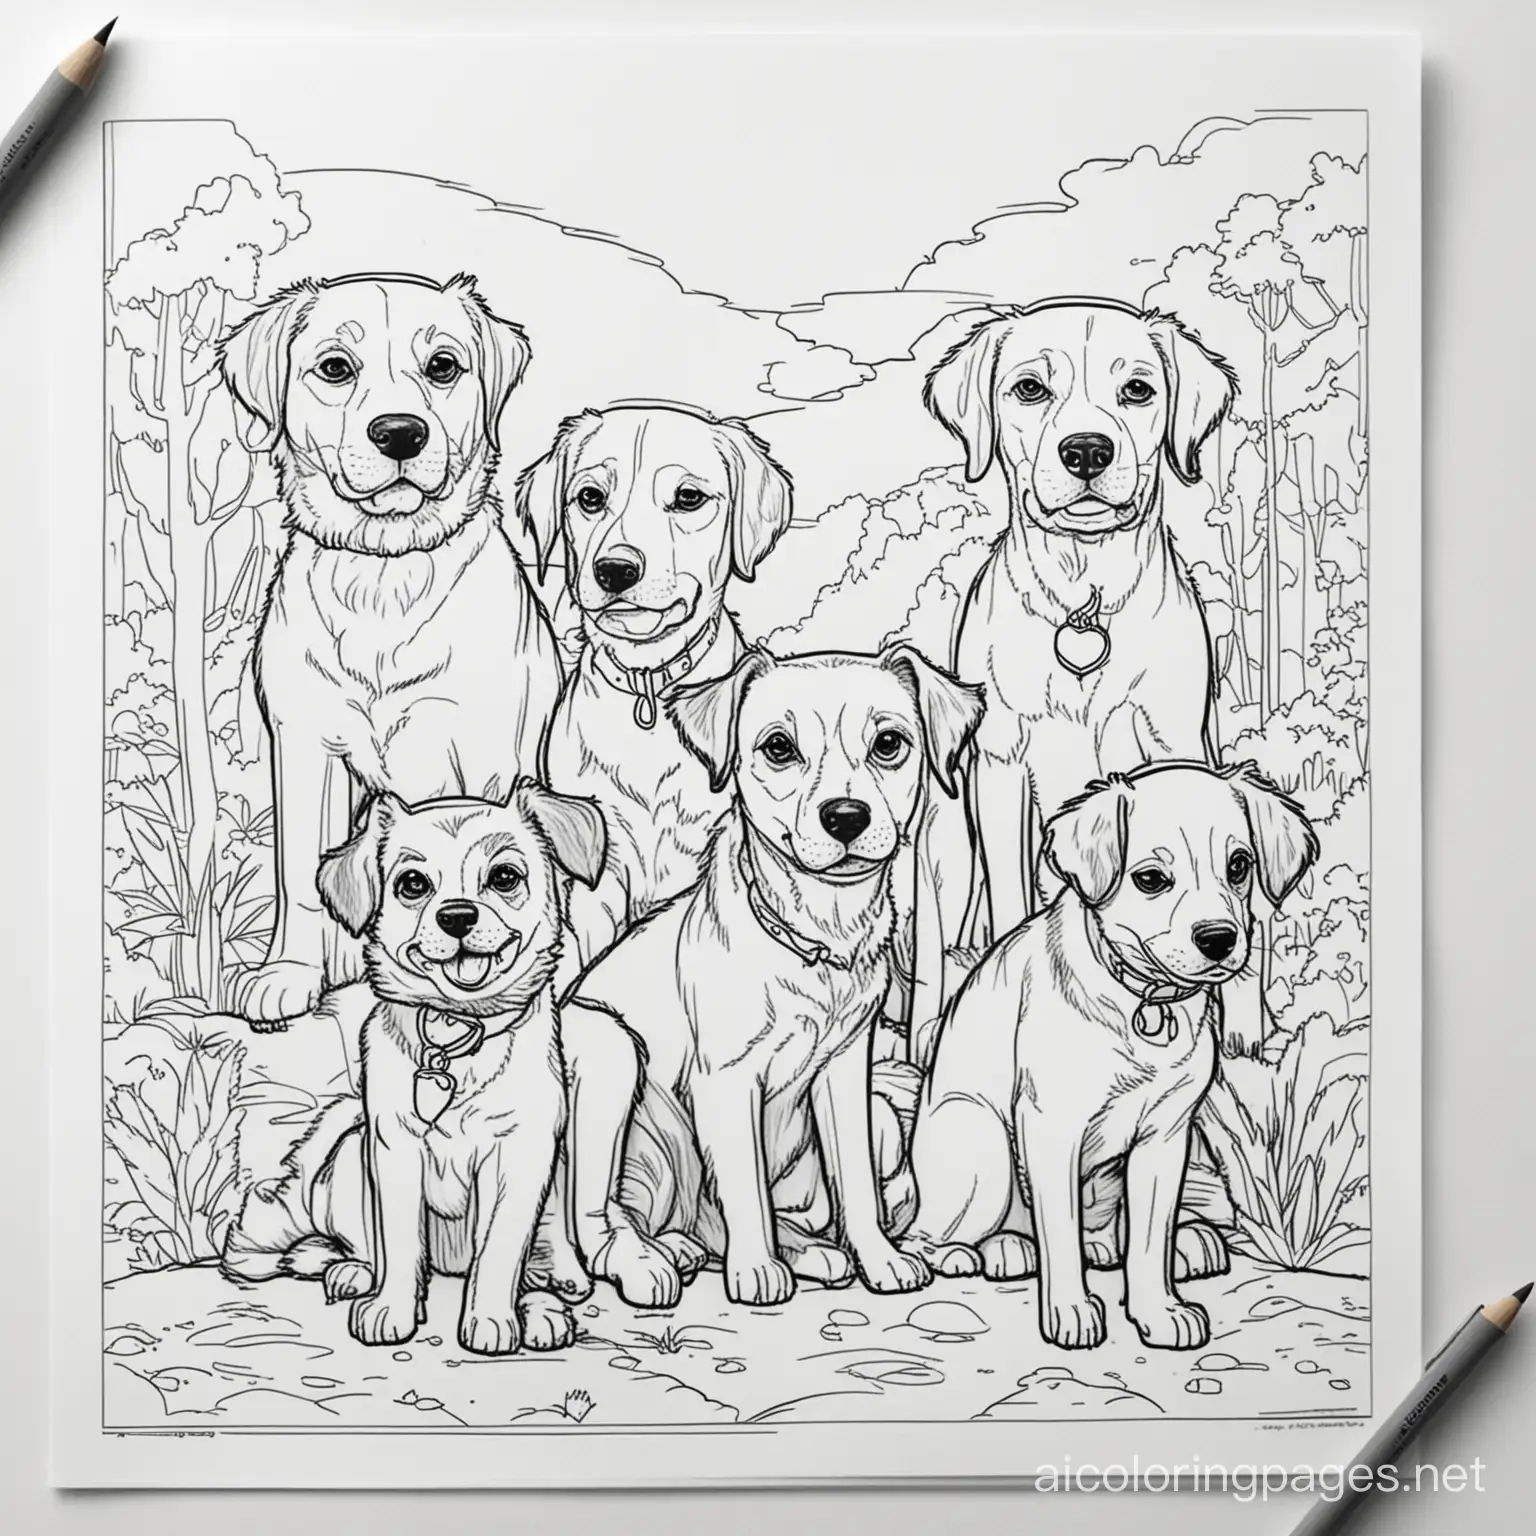 Dogs outside, Coloring Page, black and white, line art, white background, Simplicity, Ample White Space. The background of the coloring page is plain white to make it easy for young children to color within the lines. The outlines of all the subjects are easy to distinguish, making it simple for kids to color without too much difficulty